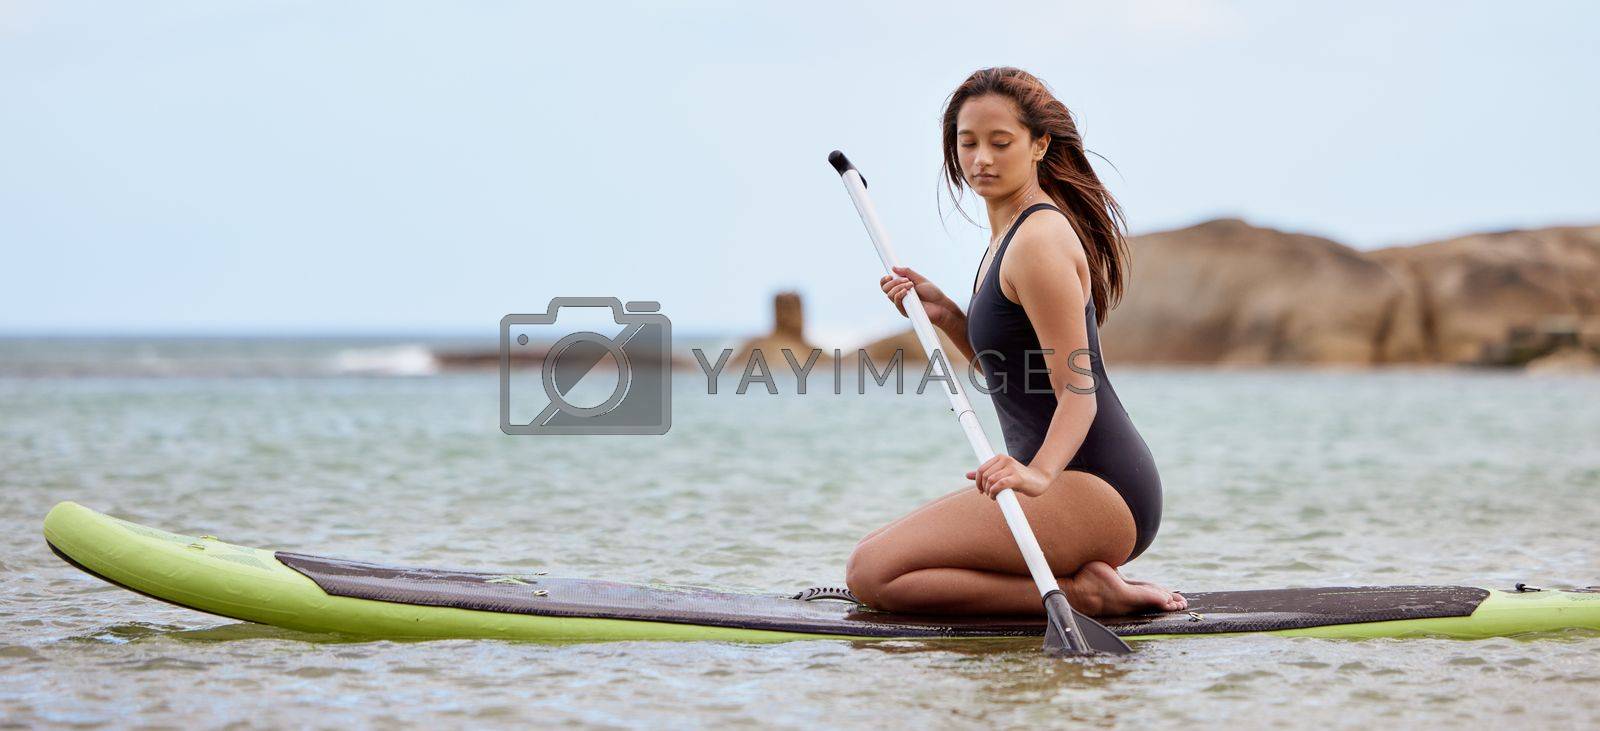 Surfer, fitness and woman in ocean with surfboard and paddle, swimwear and focus with sport outdoor and nature. Beach, exercise and young female surfing, waves and adventure with extreme sports.